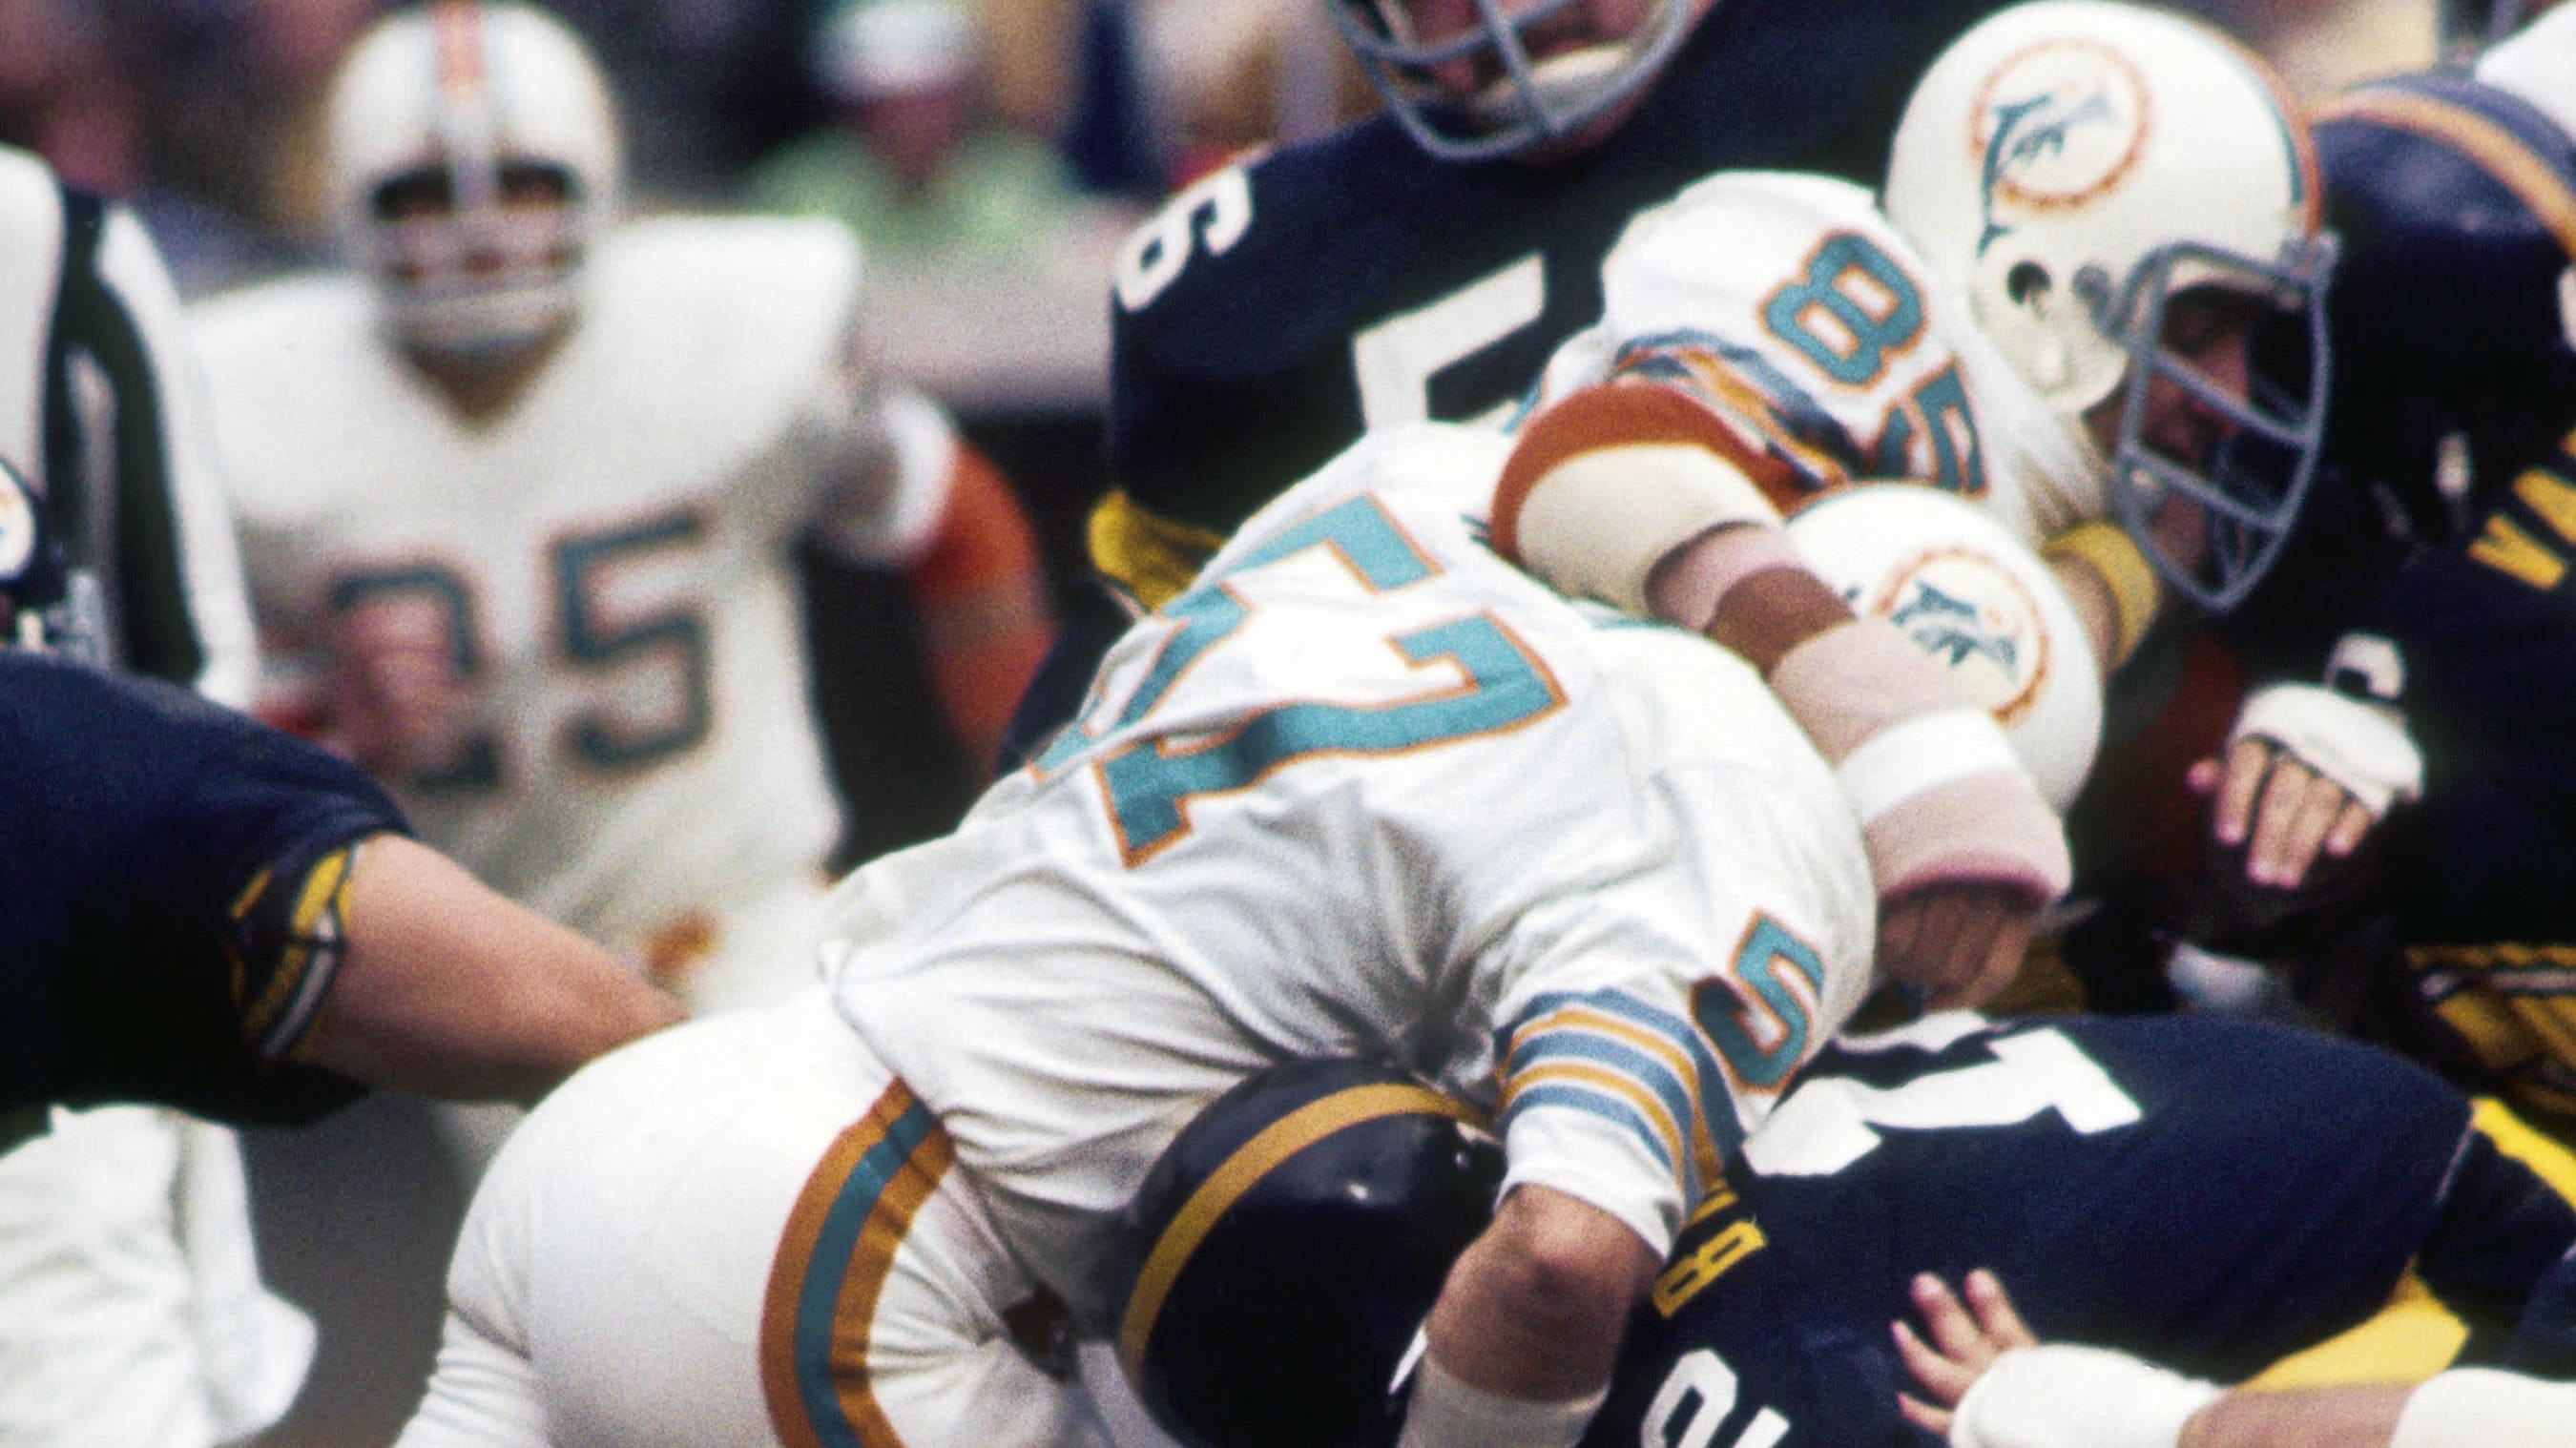 Mike Kolen (57) teams with Nick Buoniconti to bring down Terry Bradshaw in the 1972 AFC Championship Game.